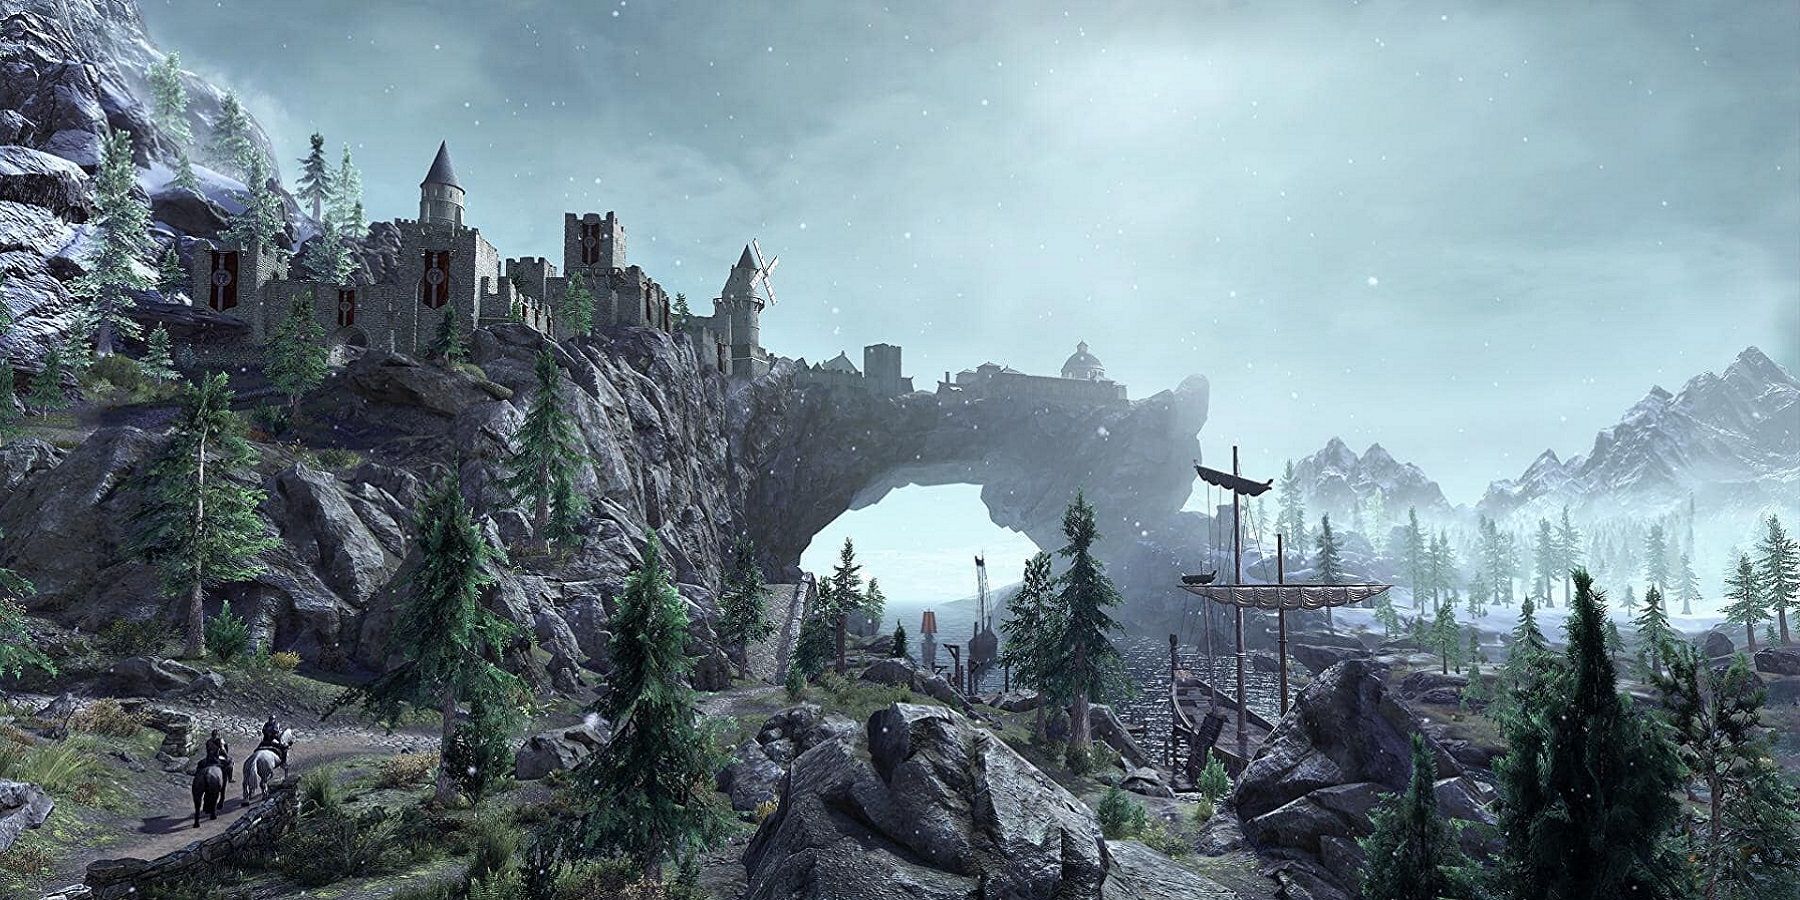 Image from Skyrim showing the city of Solitude off in the distance, with the docks nearby.